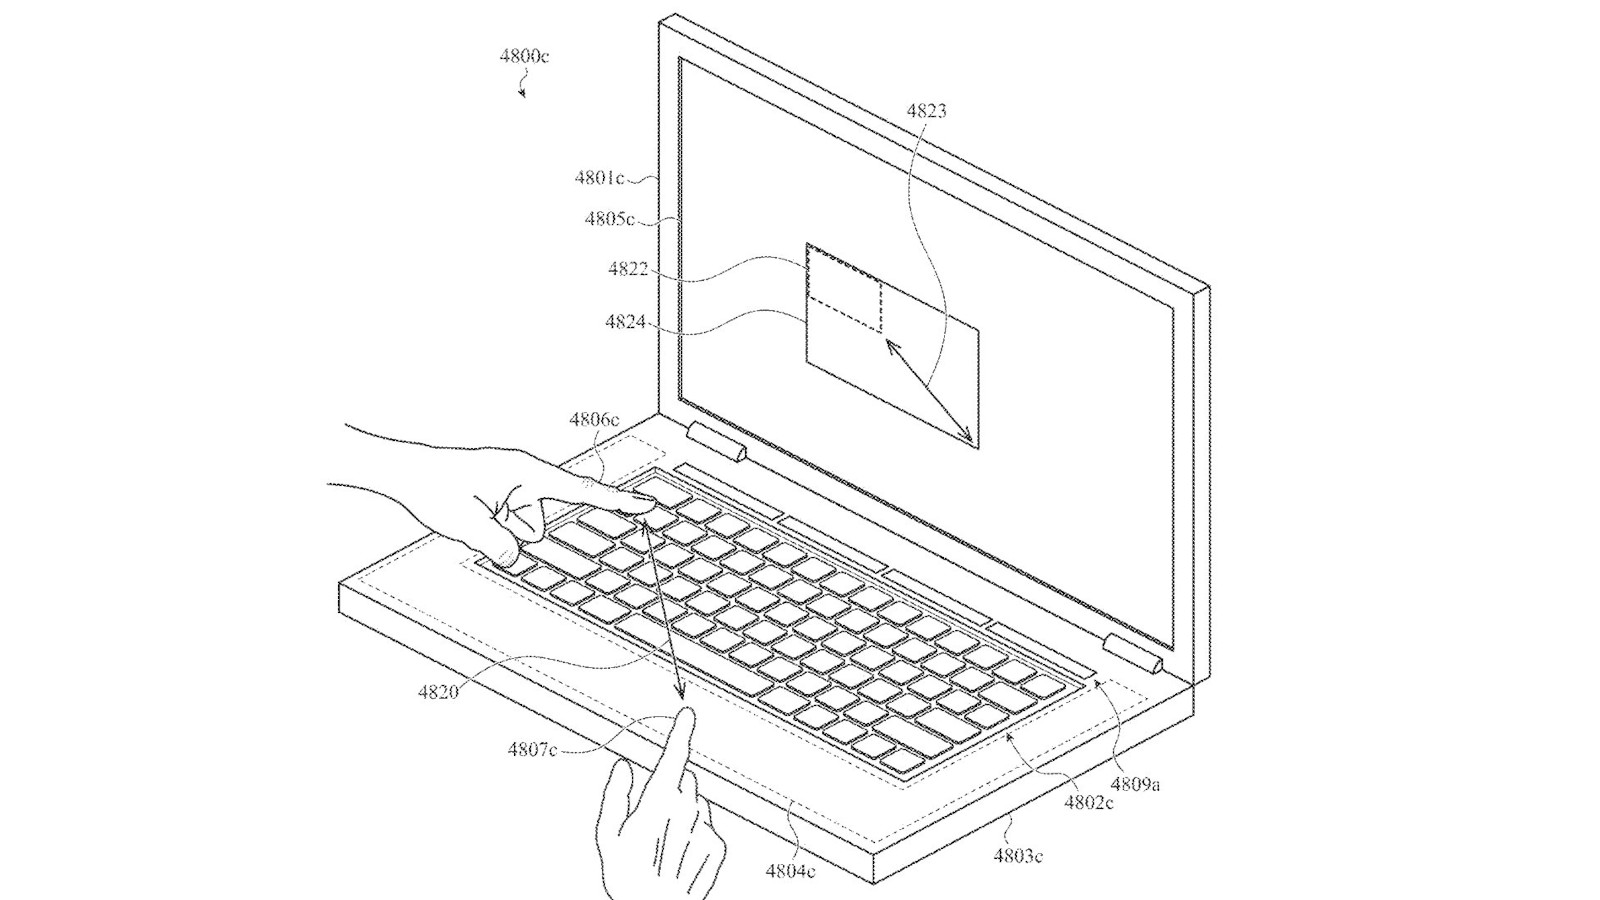 An Apple design patent illustration showing a touchpad keyboard